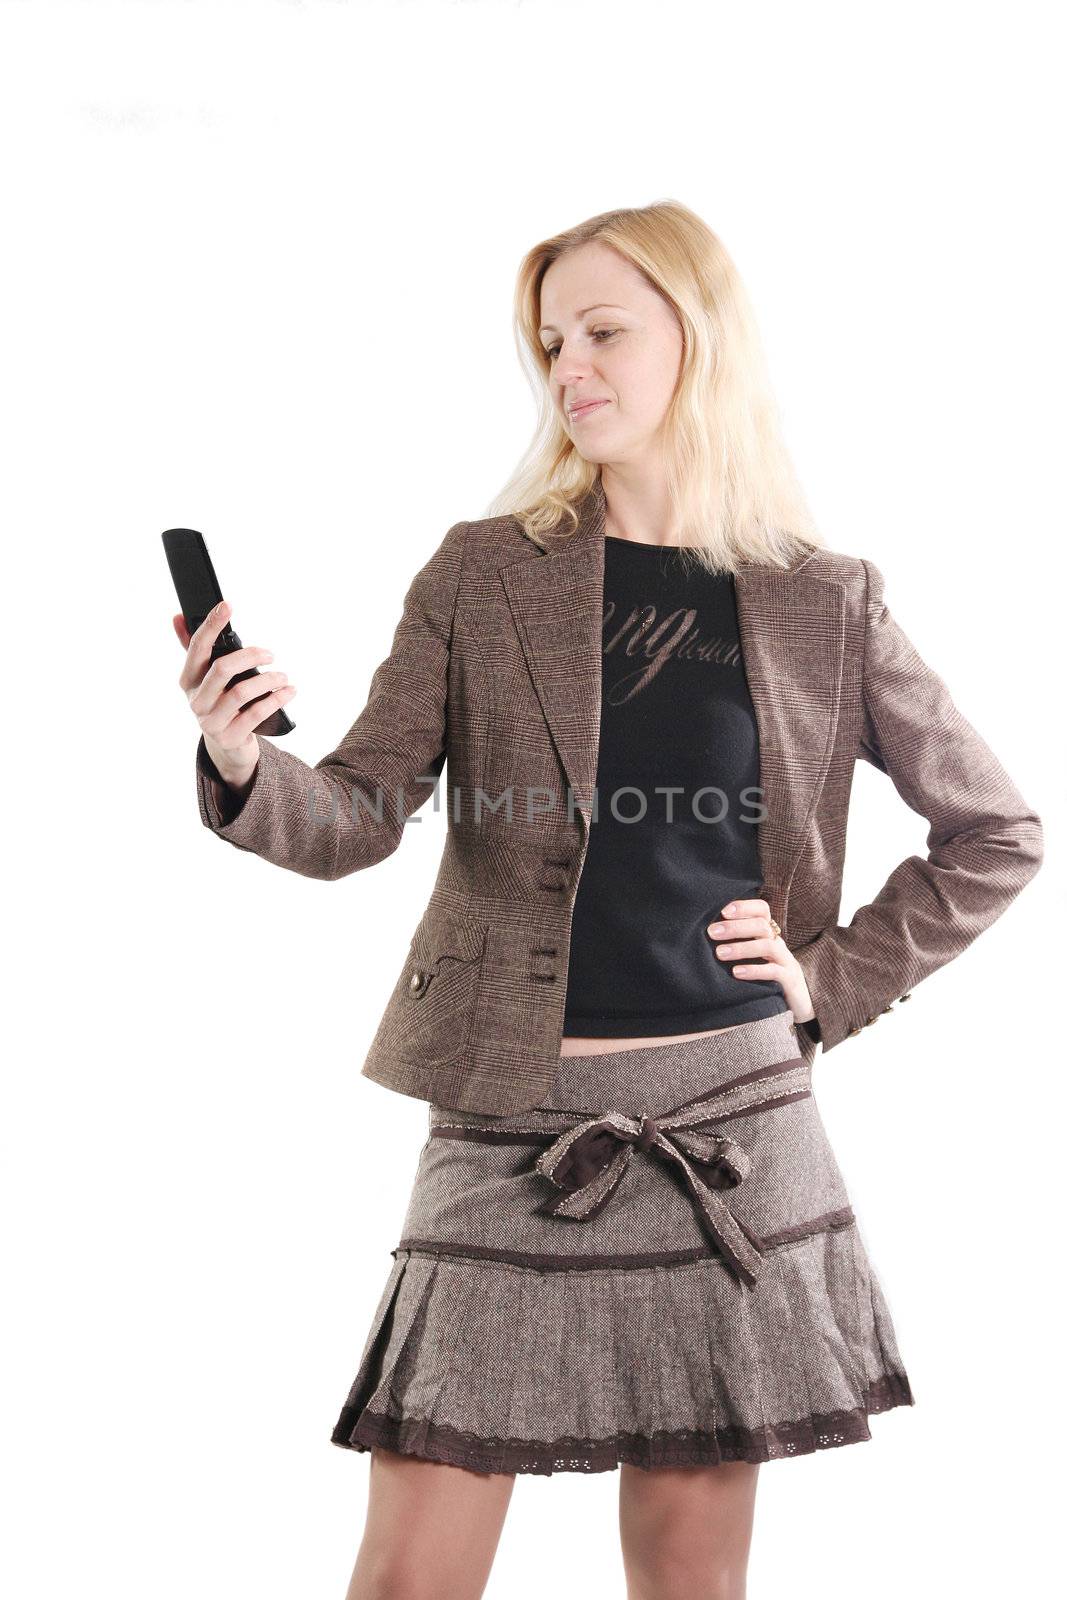 communications women discussion professional concepts isolated phone